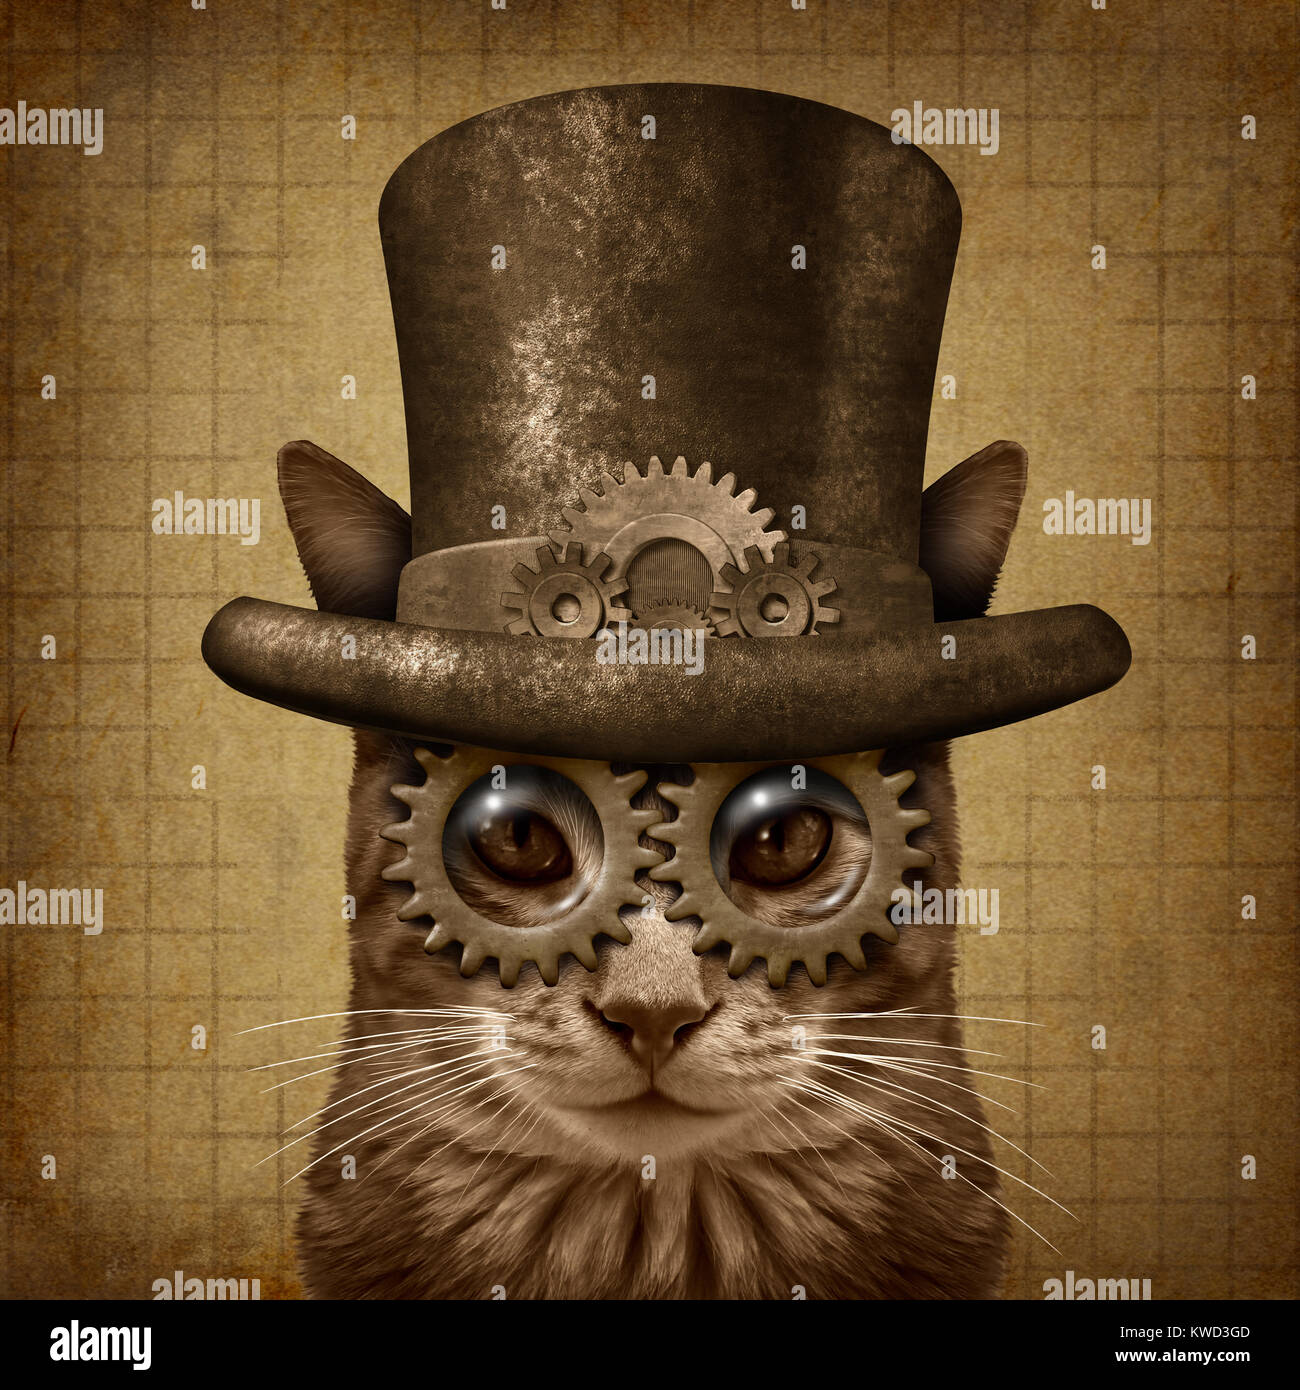 Steampunk and steam punk grunge cat with 3D illustration elements. Stock Photo